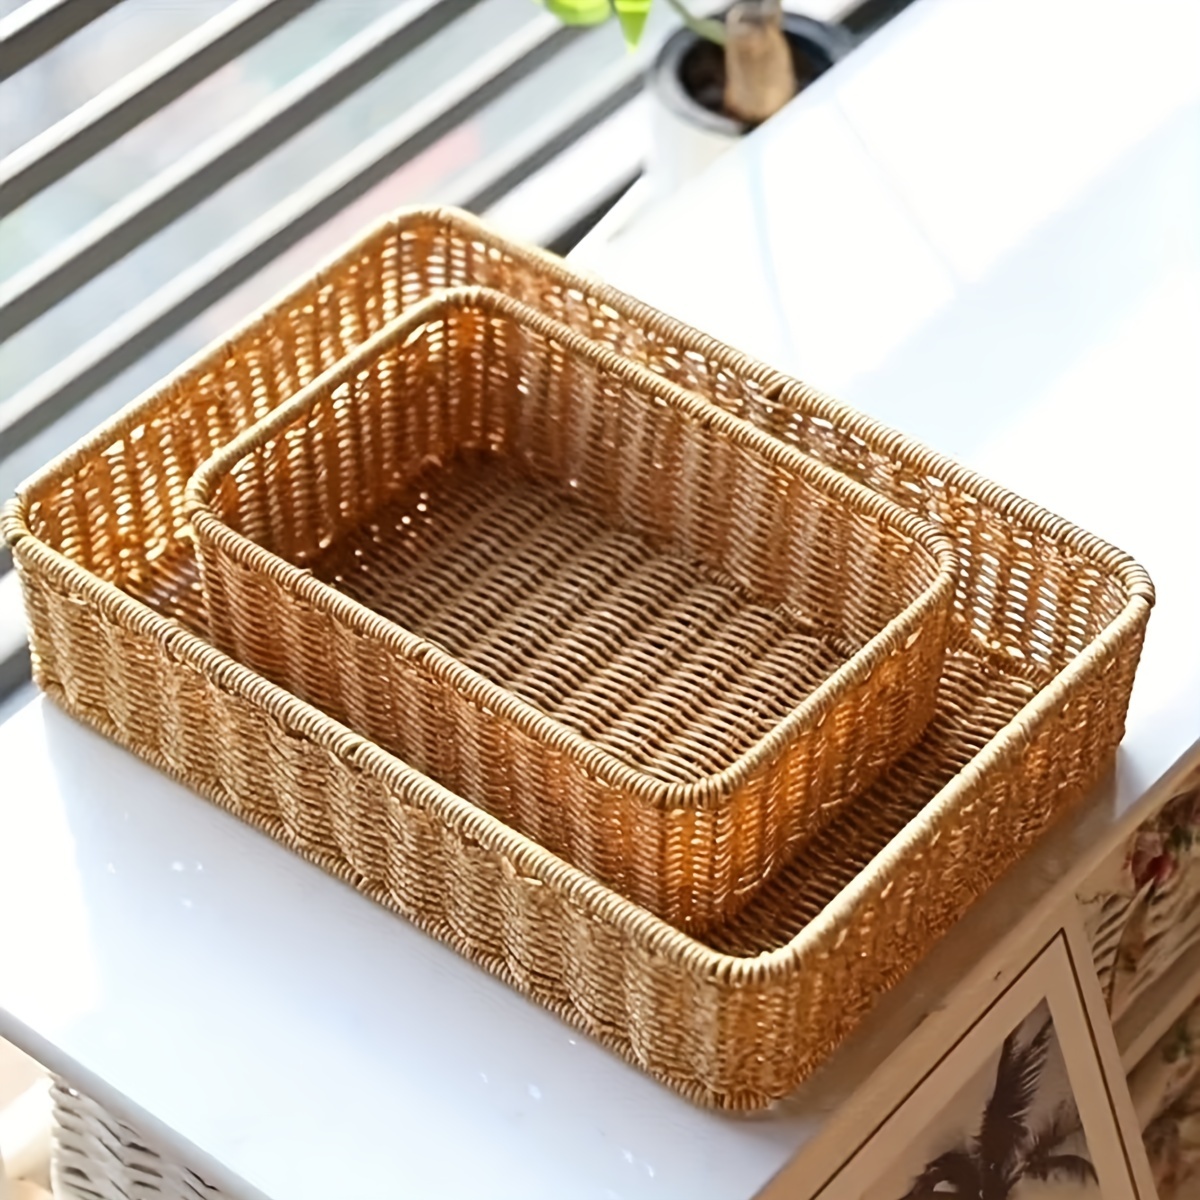 2pcs Woven Small Bamboo Baskets Storage Box For Desktop Sundries, Snack  Organization And Bedroom Decoration